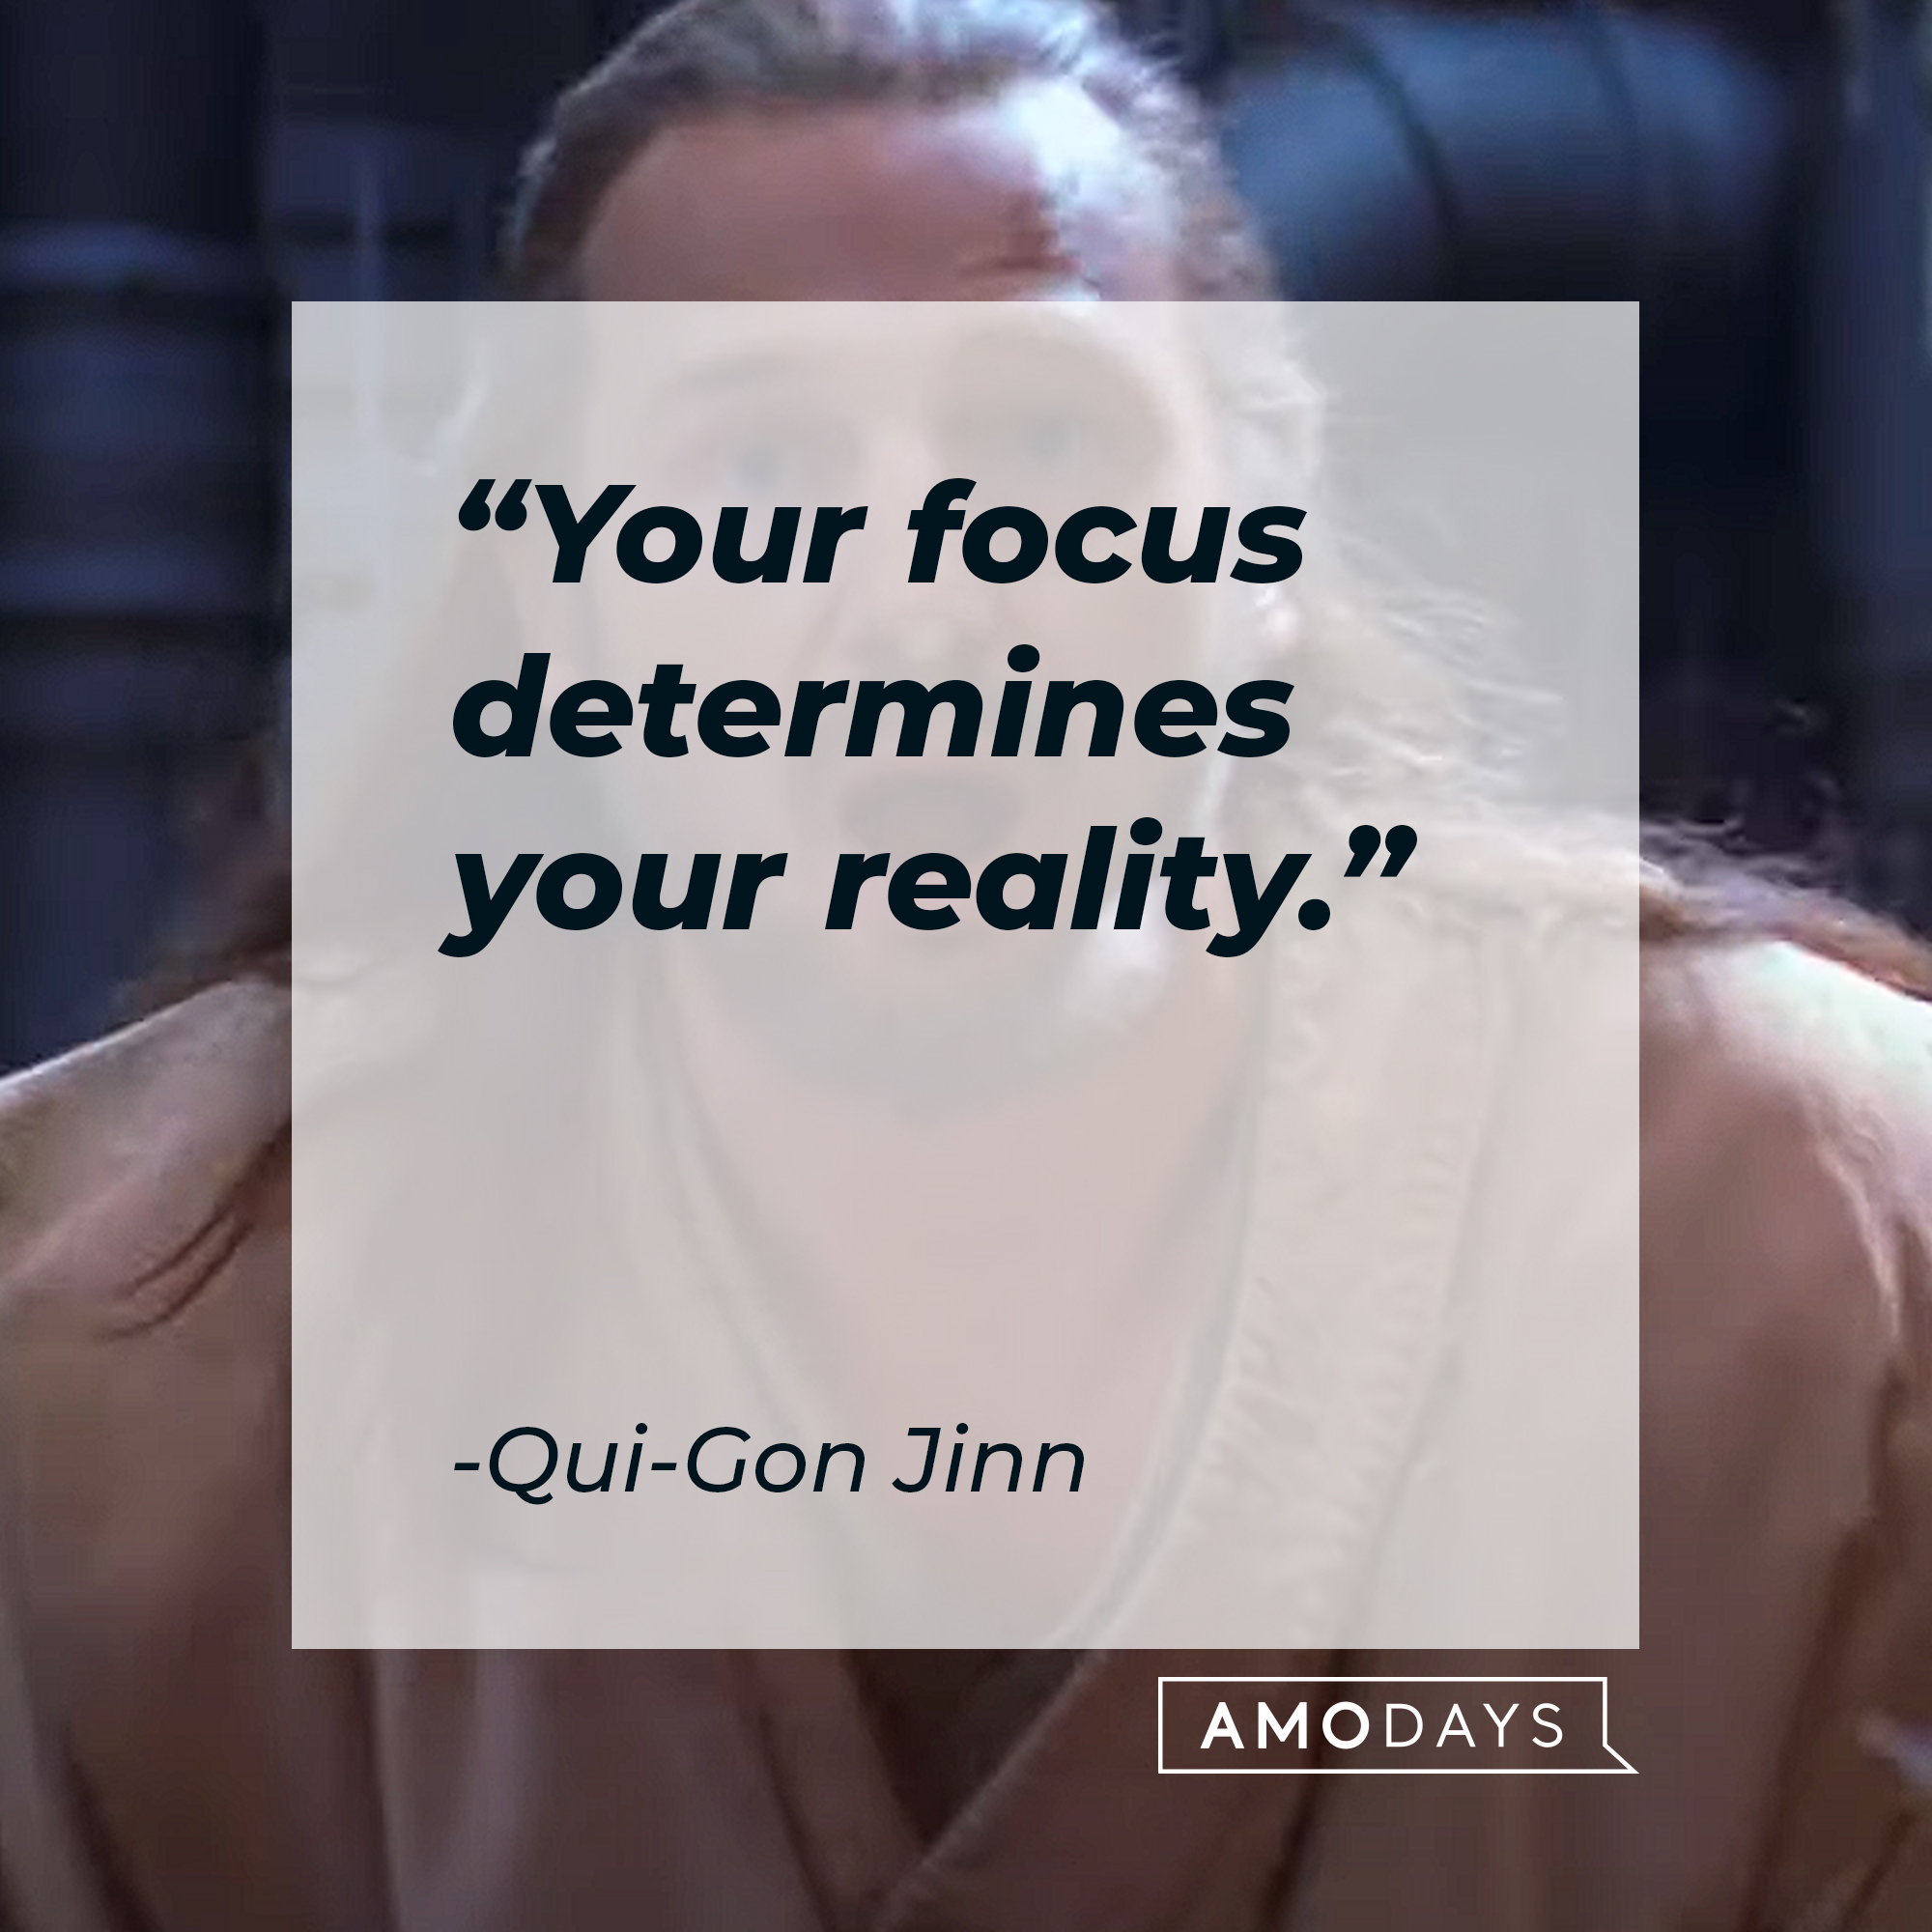 Qui-Gon Jinn with his quote: "Your focus determines your reality." | Source: Youtube/StarWars